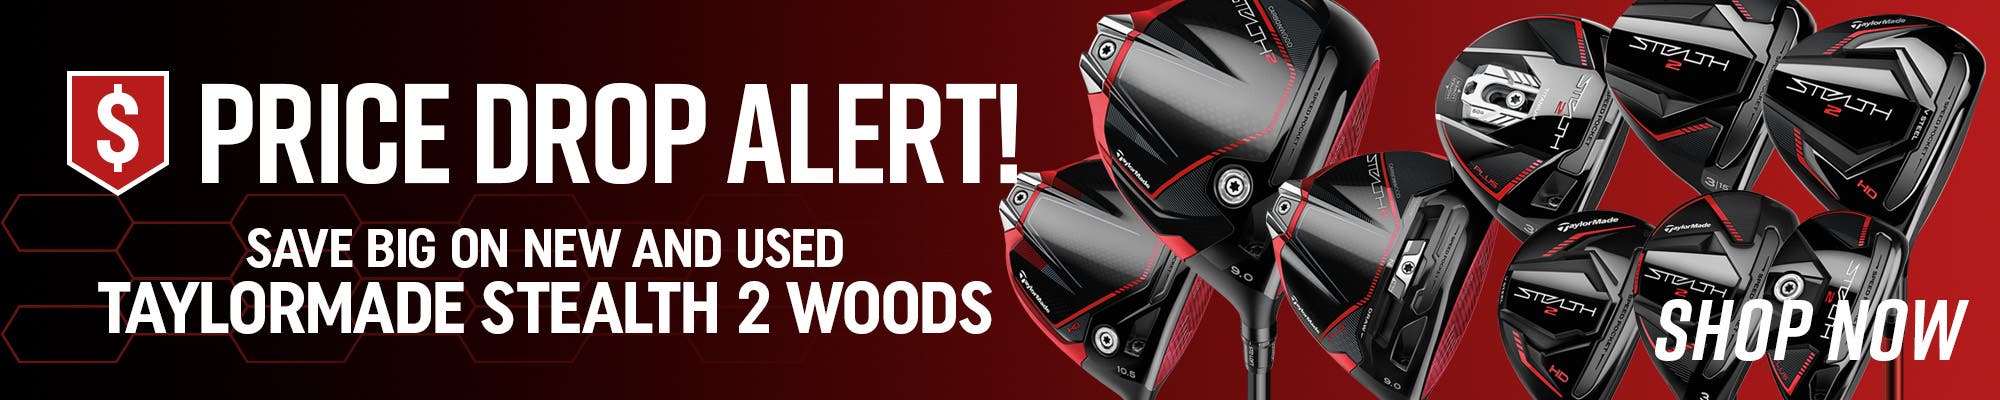 Price Drop Alert! Save Big on New and Used TaylorMade Stealth 2 Woods | shop now